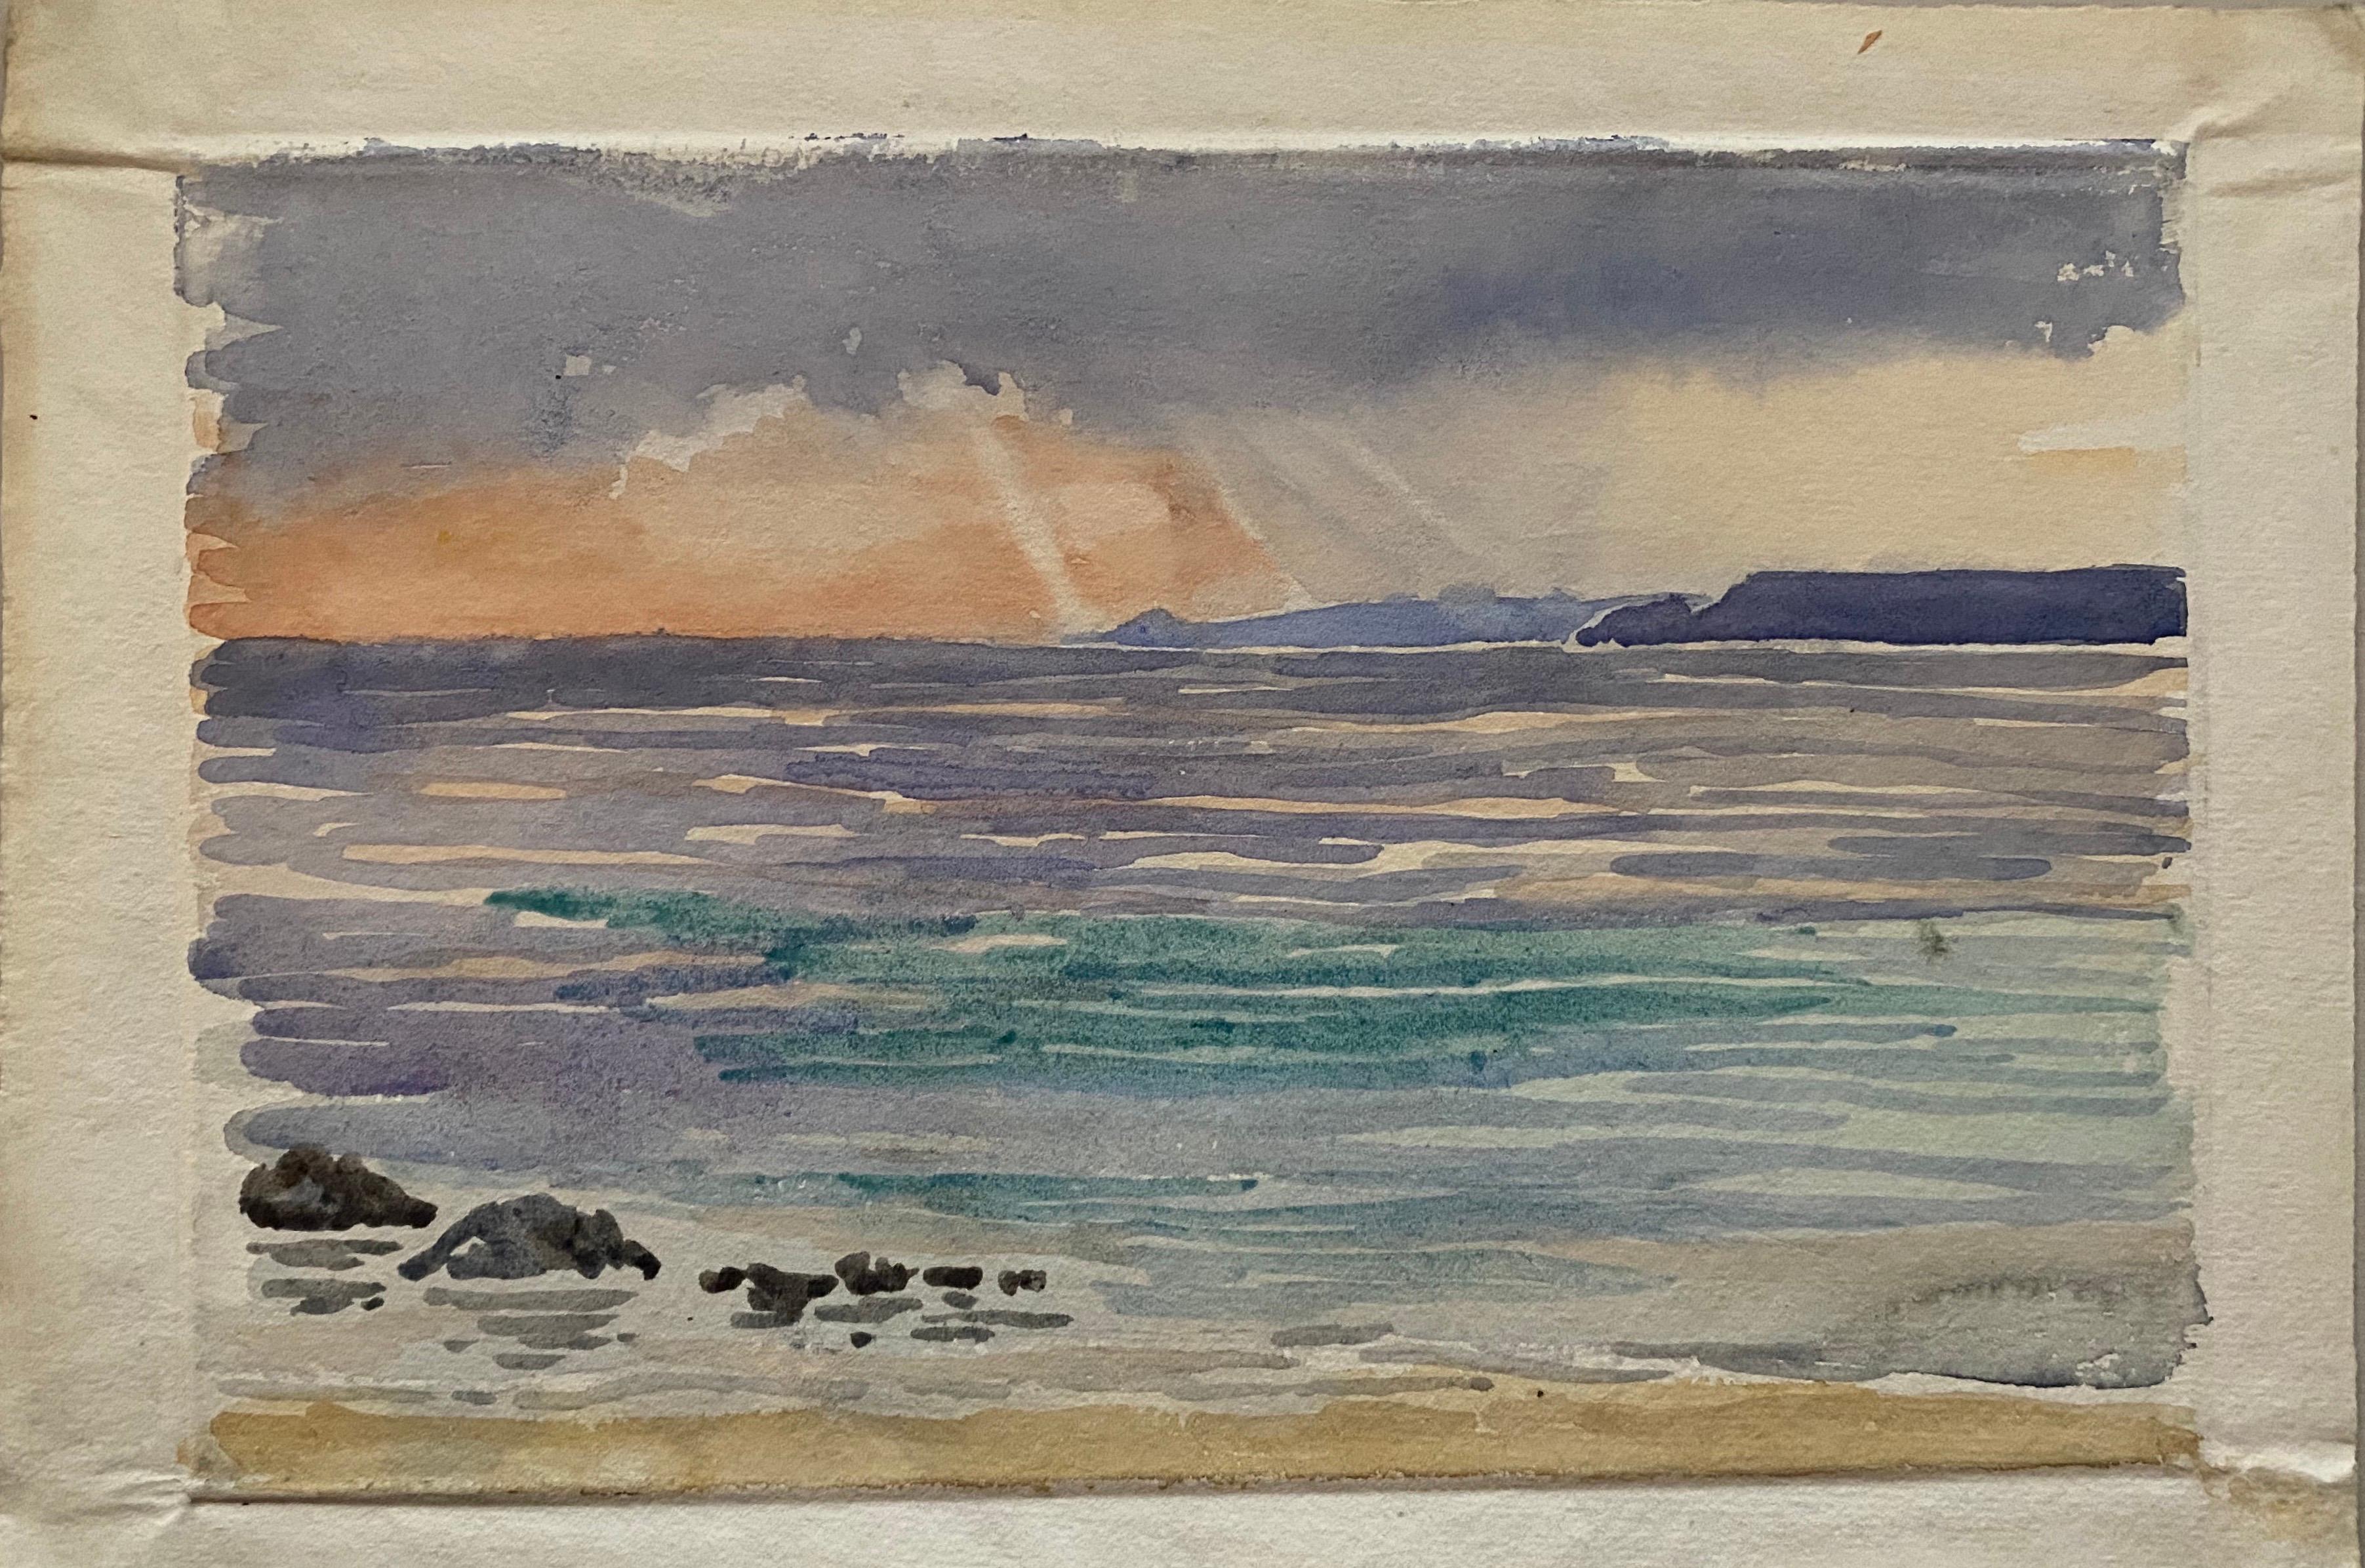 Sunset on sea.
English School, early 1900's.
Original watercolor painting on artists paper, unframed.
Overall paper size: 7.75 x 11 inches.


From a large private collection of English watercolor paintings, all by the same hand, we offer this